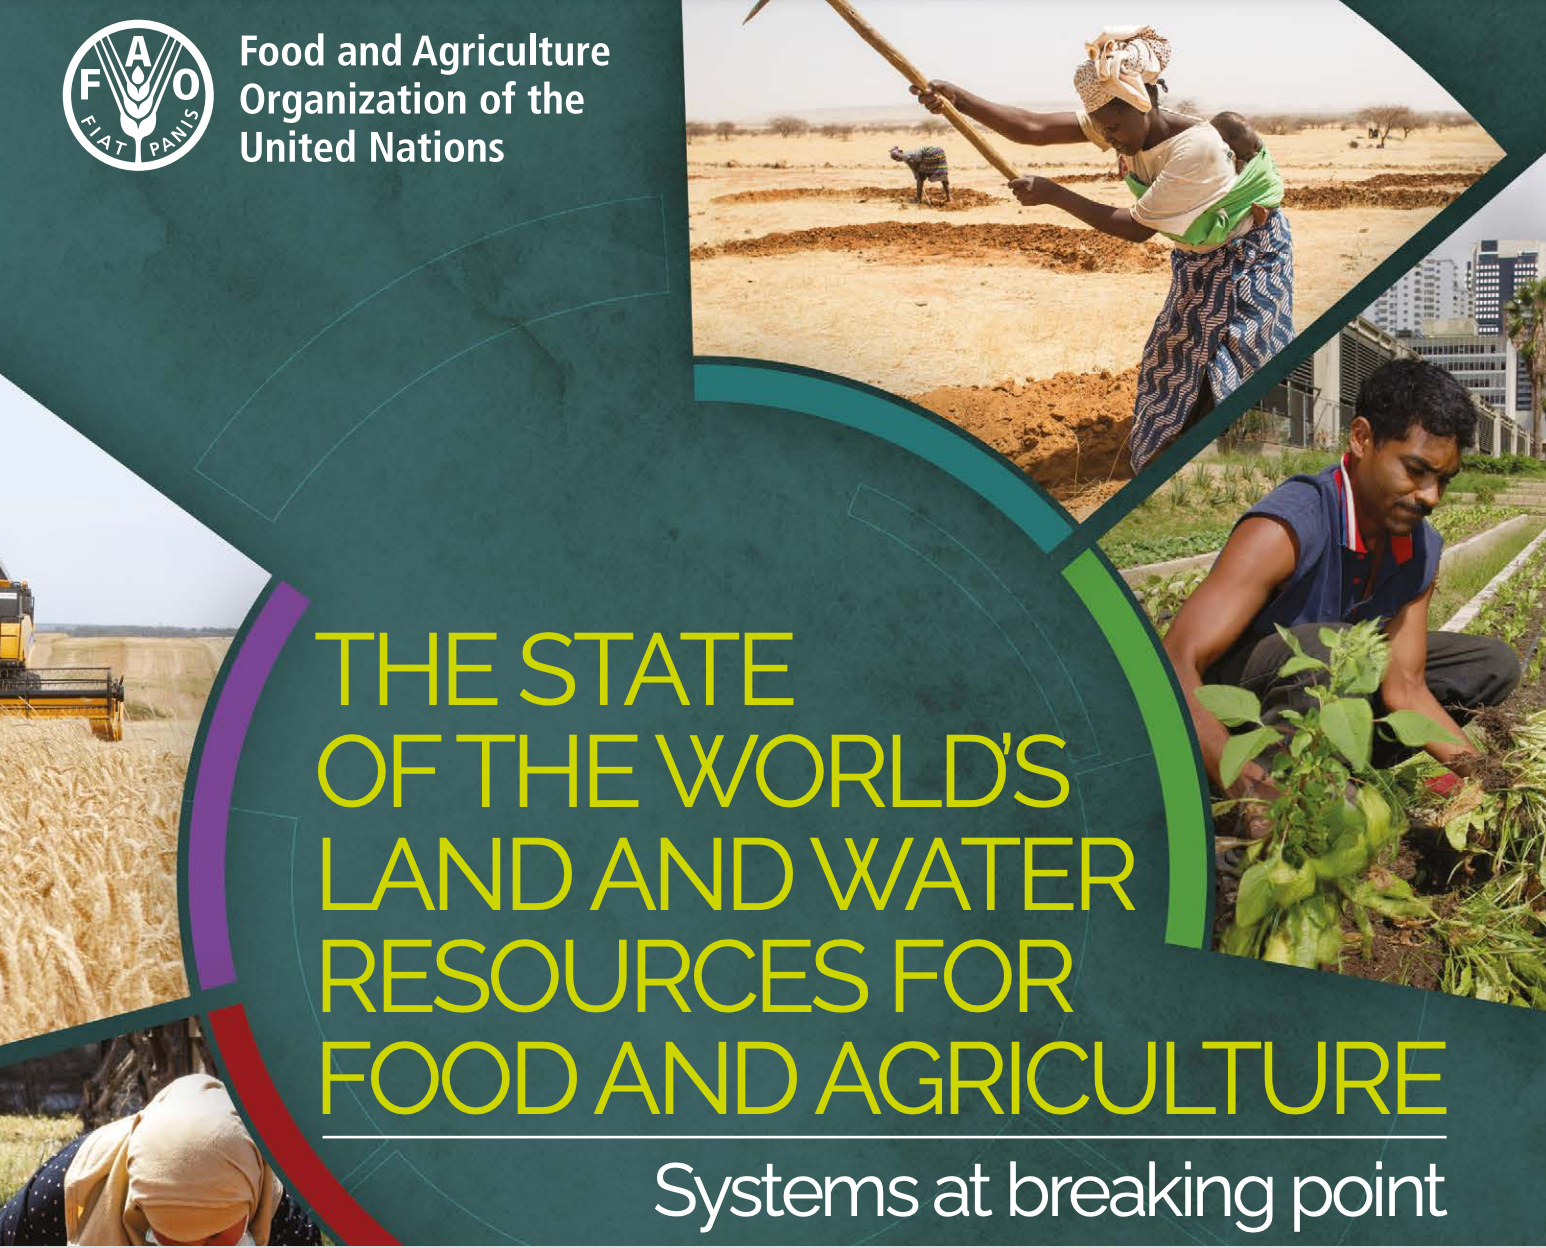 FAO's new report- State of the world’s land and water resources for food and agriculture